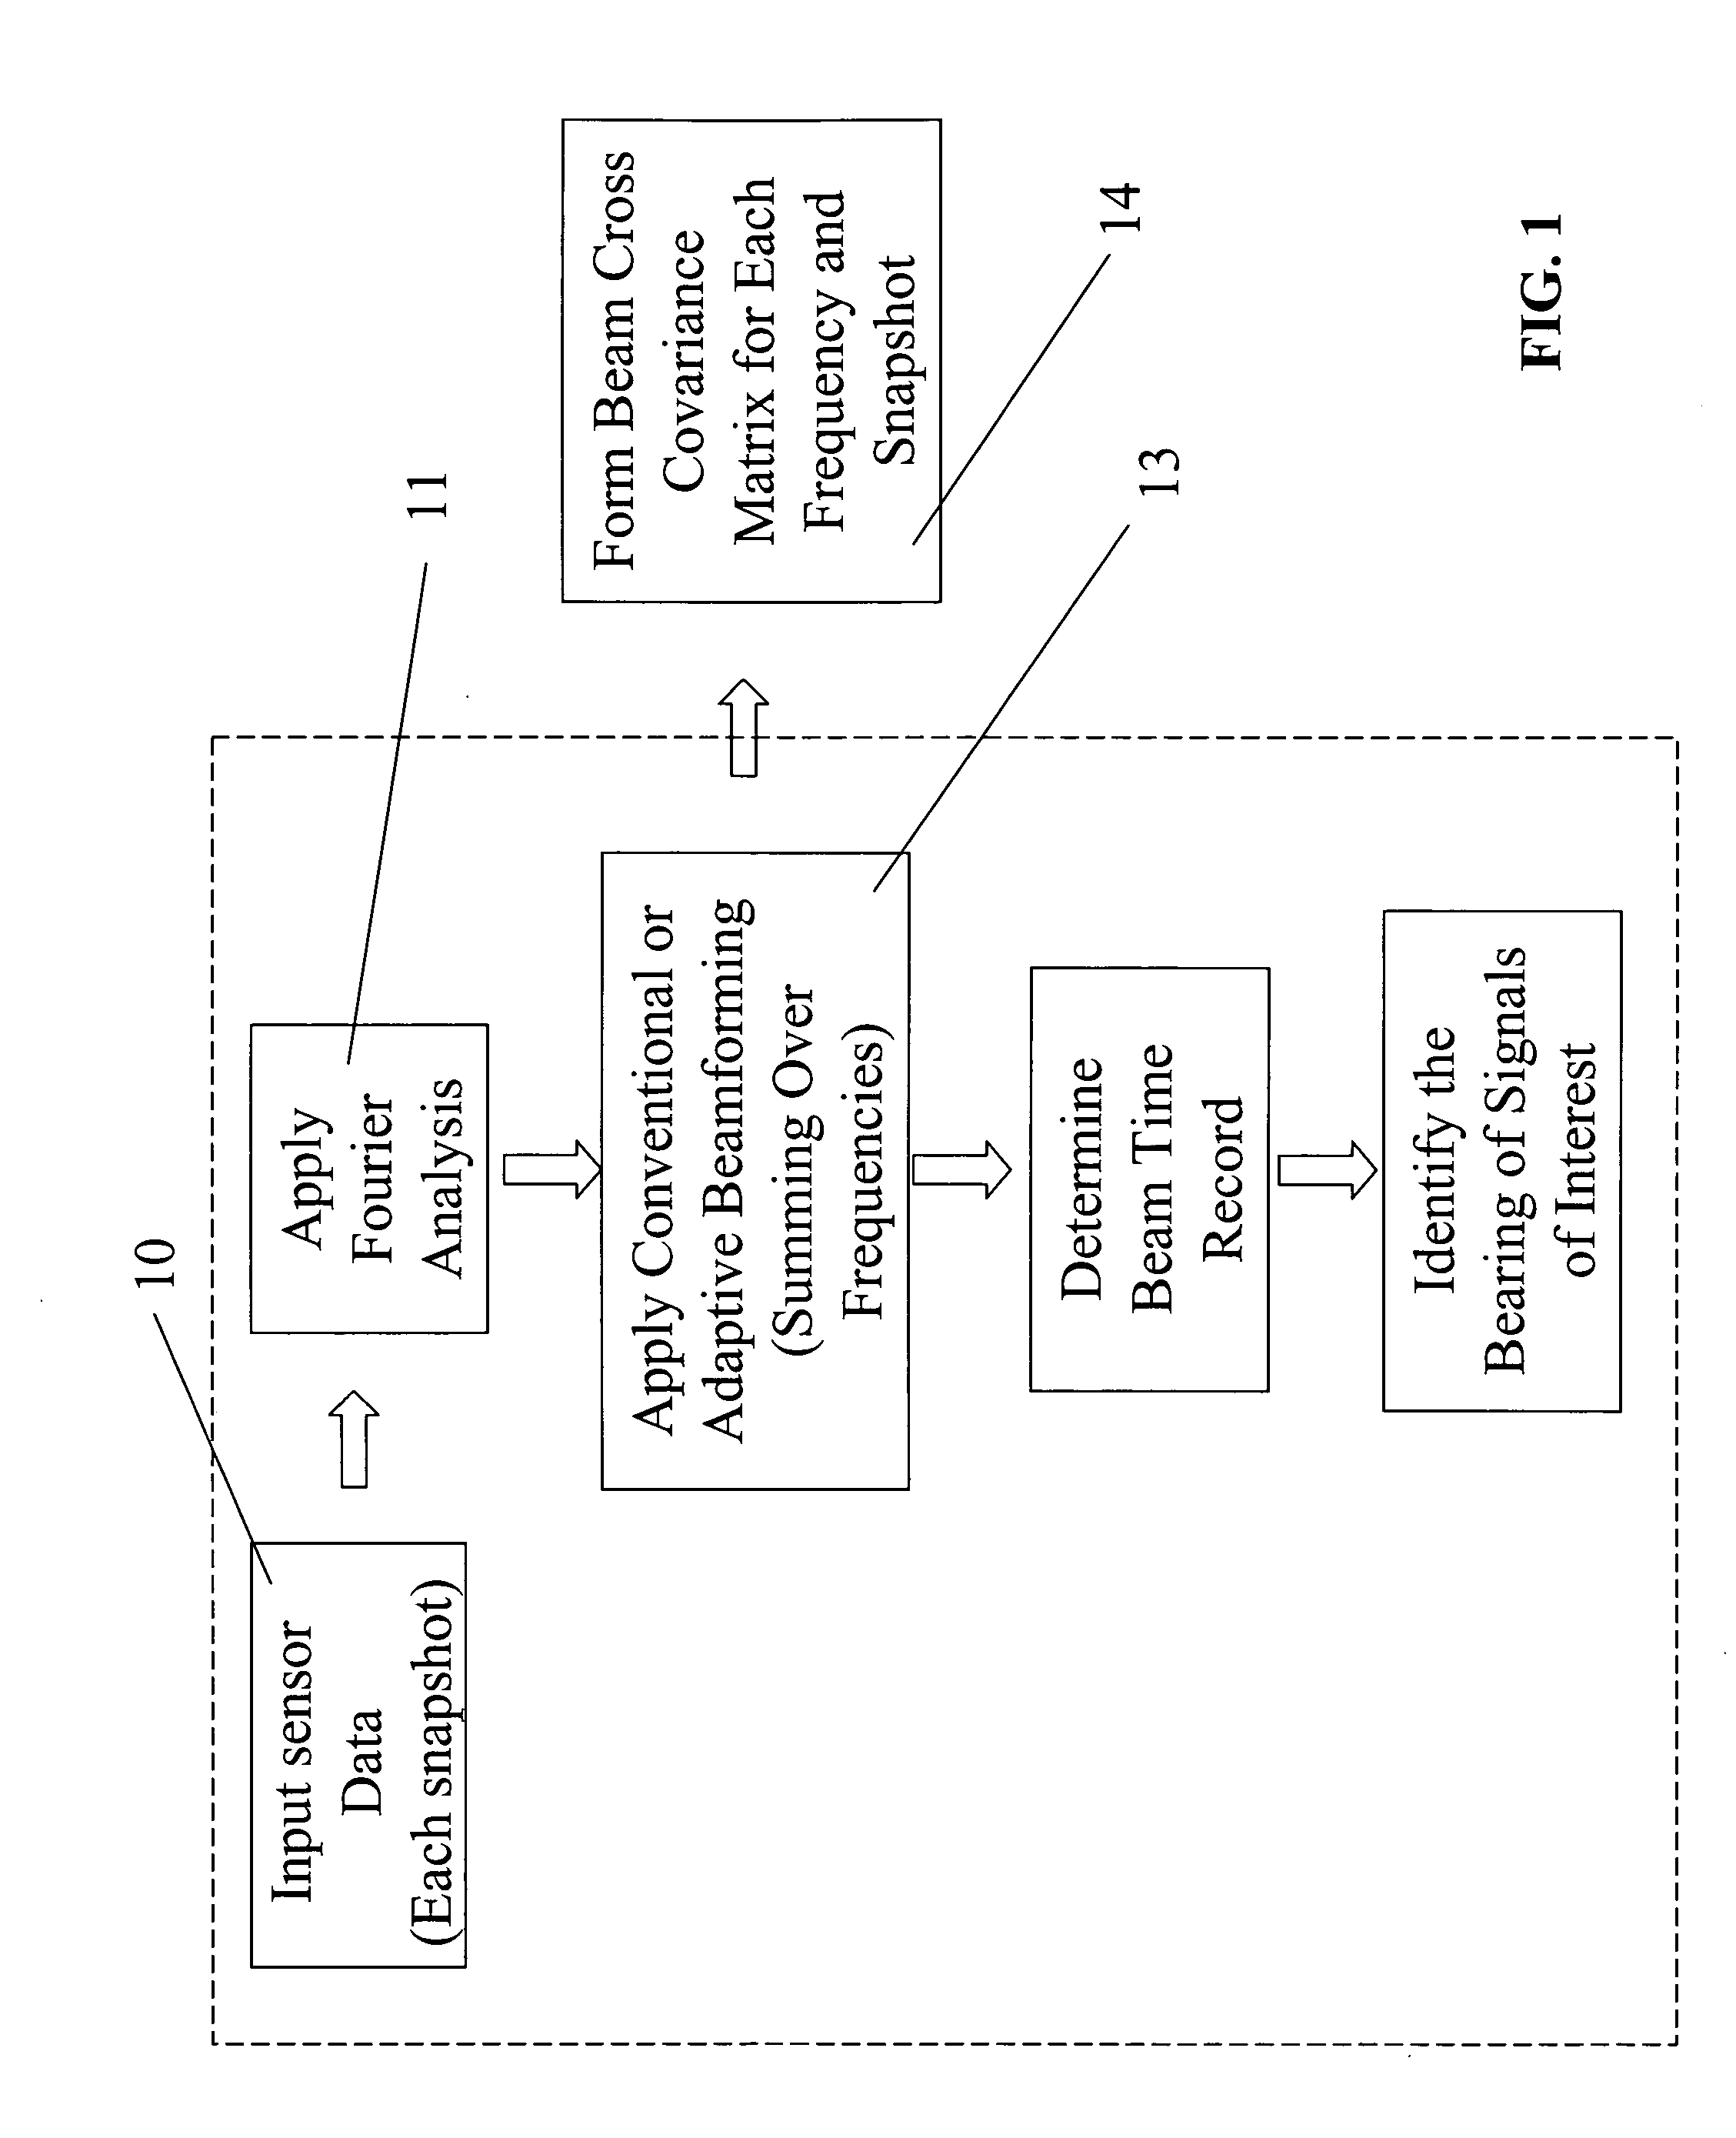 Method and apparatus for acoustic source tracking using a horizontal line array